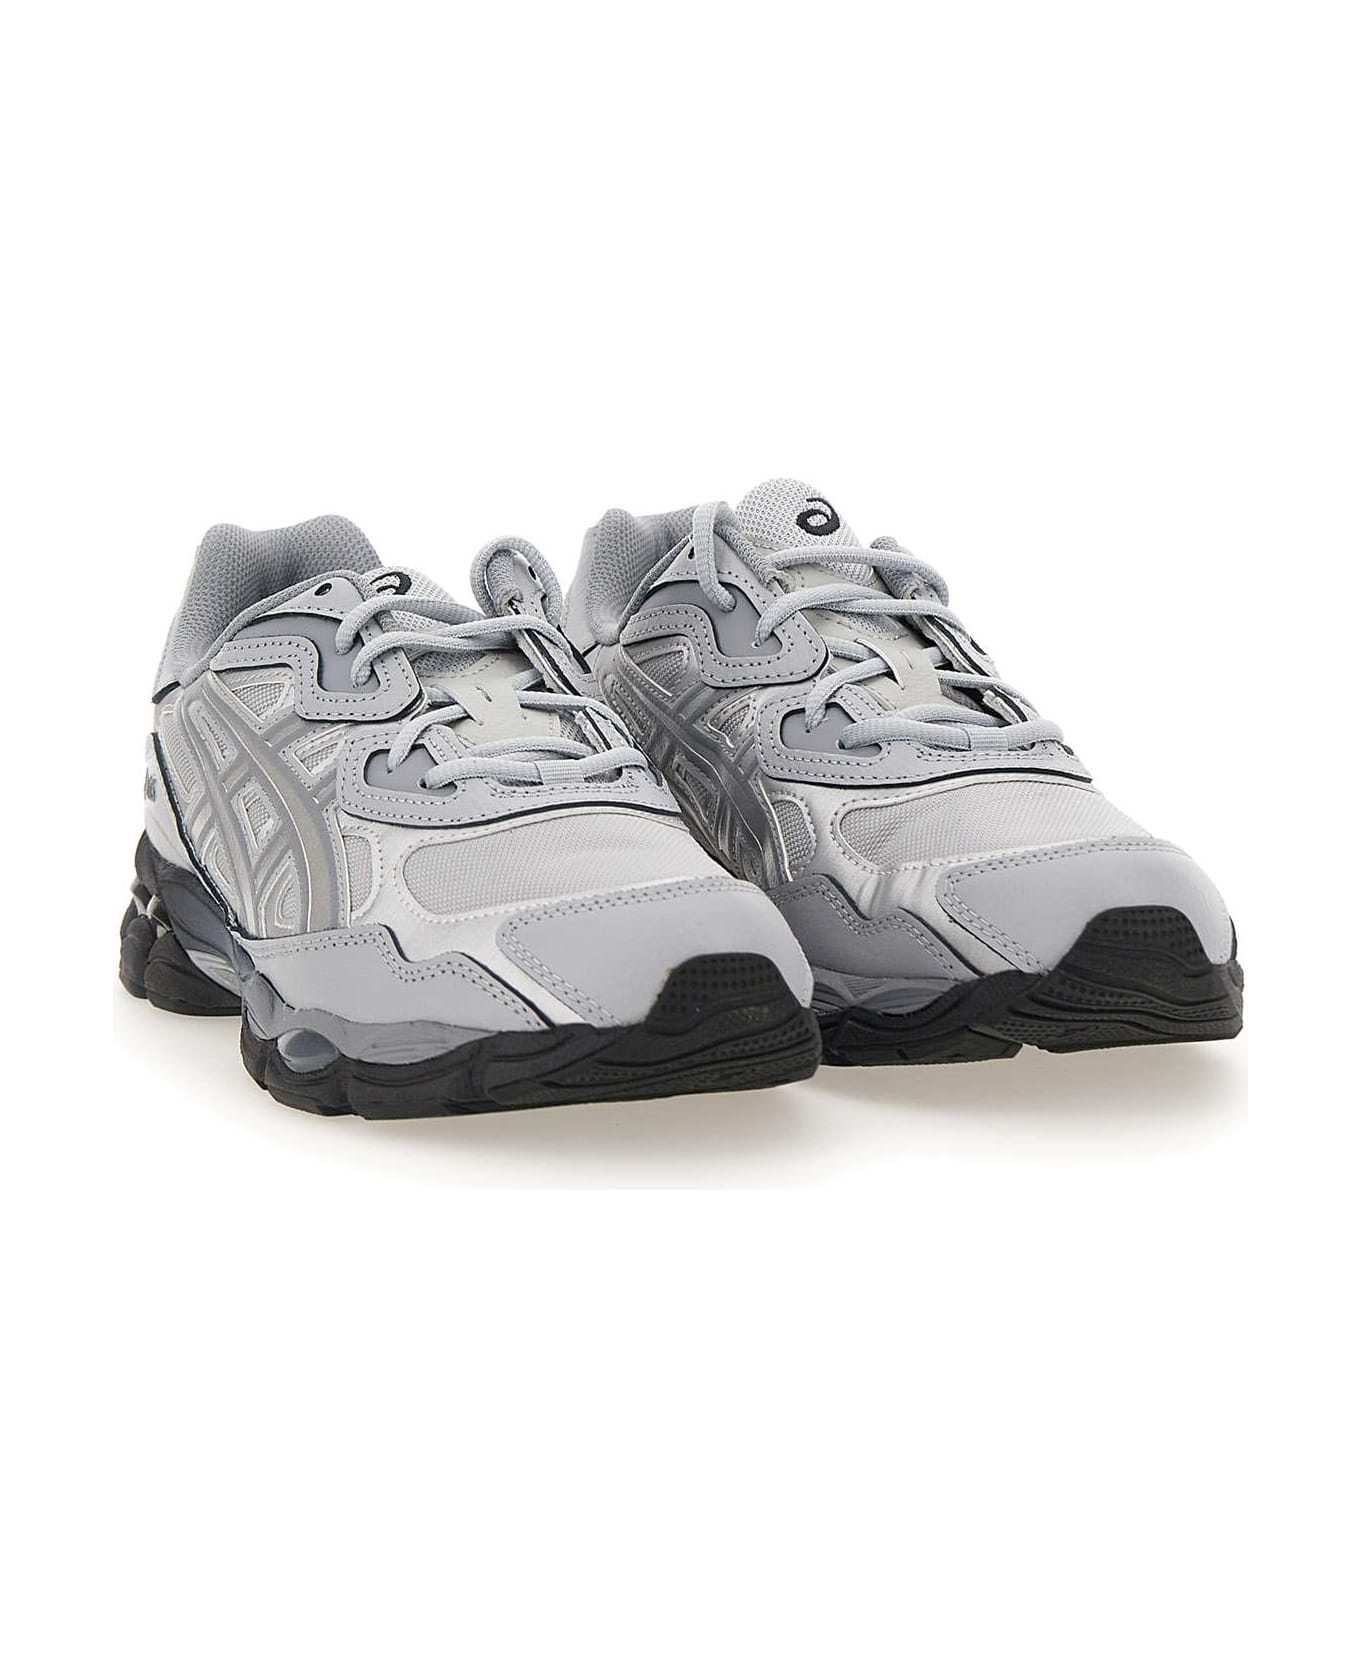 Asics "gel Nyc" Leather Sneakers - GREY スニーカー